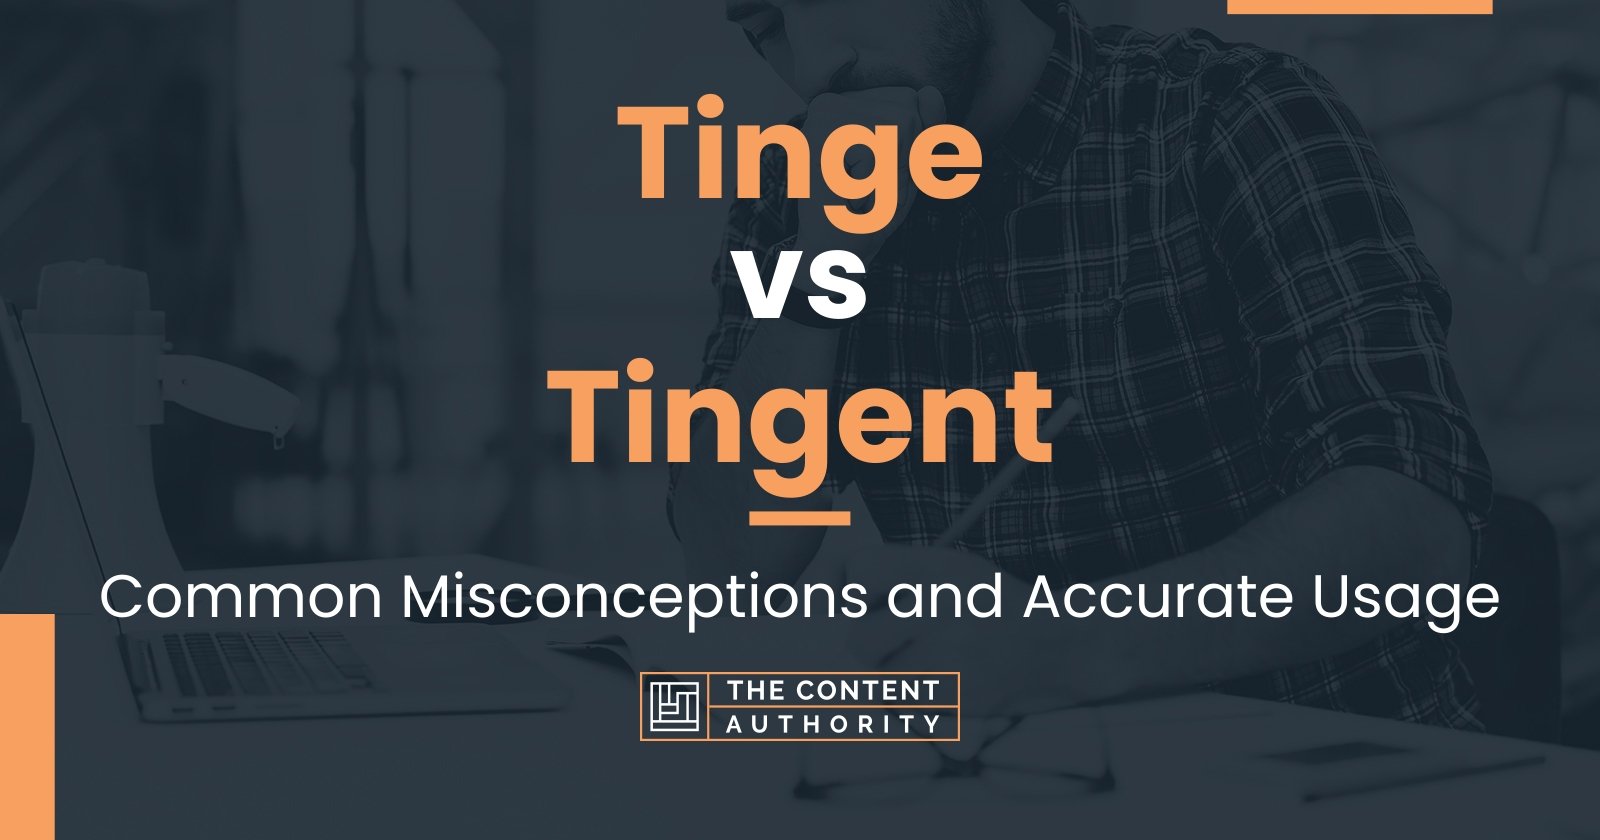 Tinge vs Tingent: Common Misconceptions and Accurate Usage